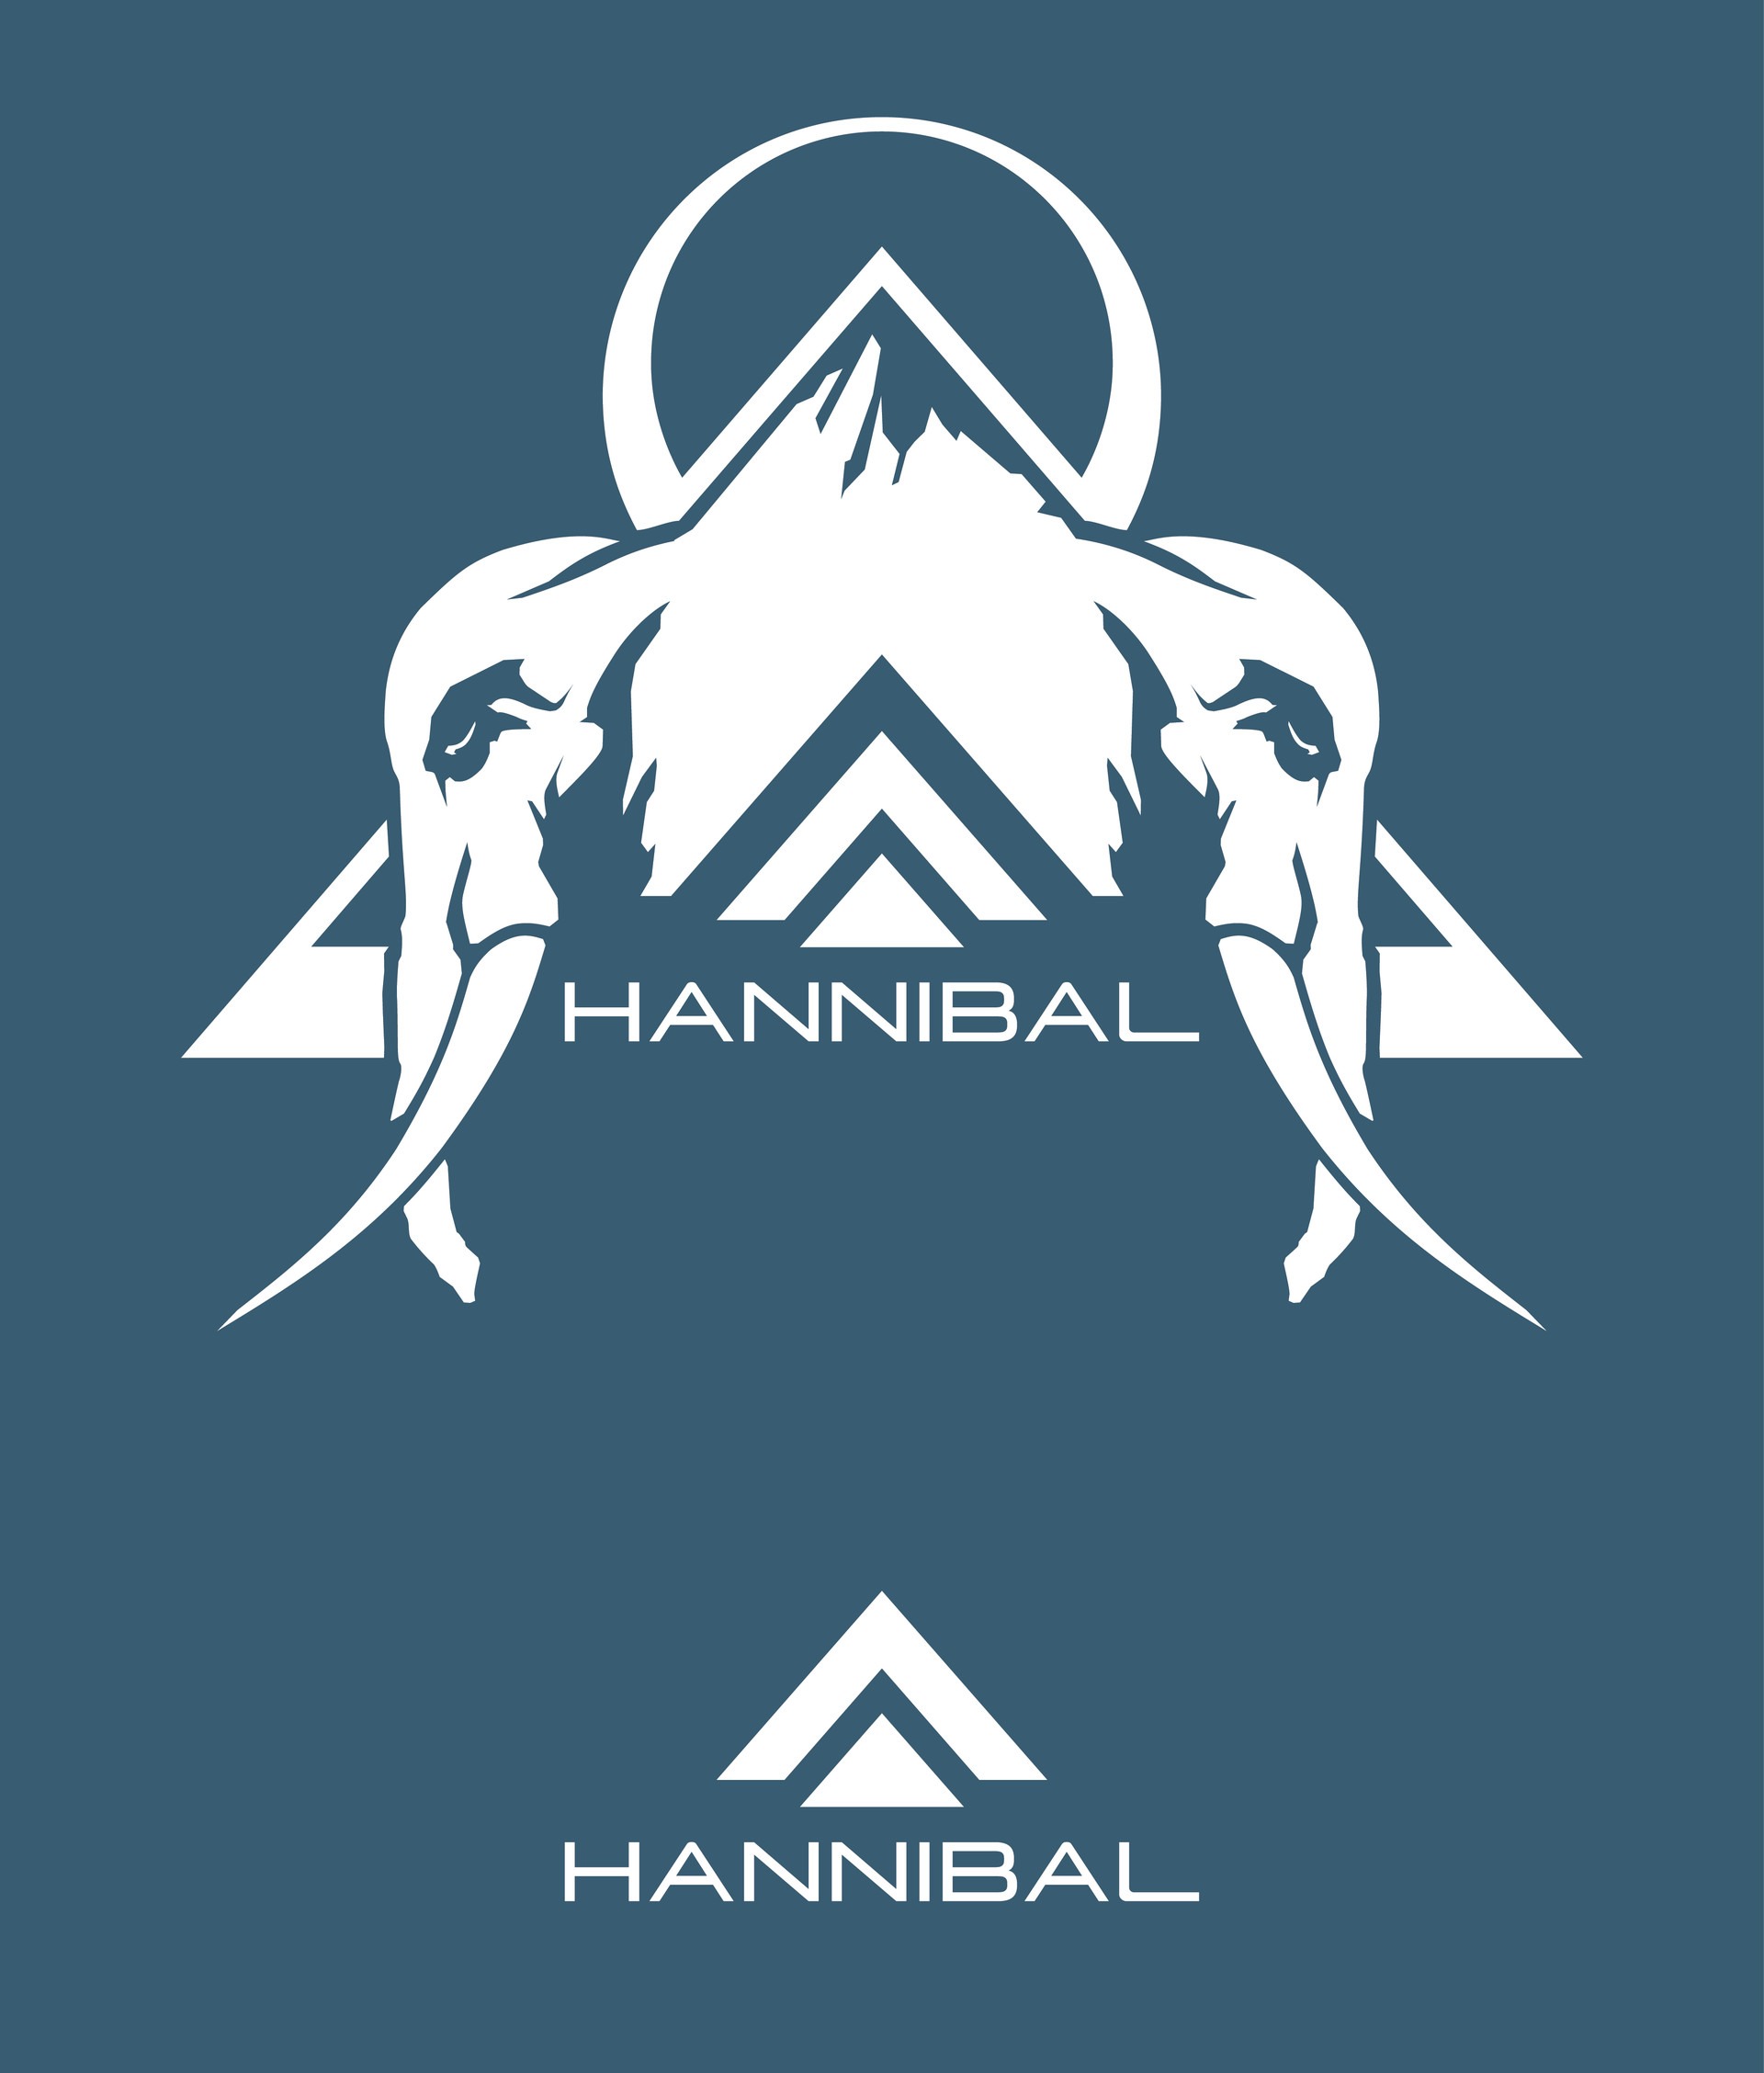 Eric_Will-Hannibal_Weapon_Systems